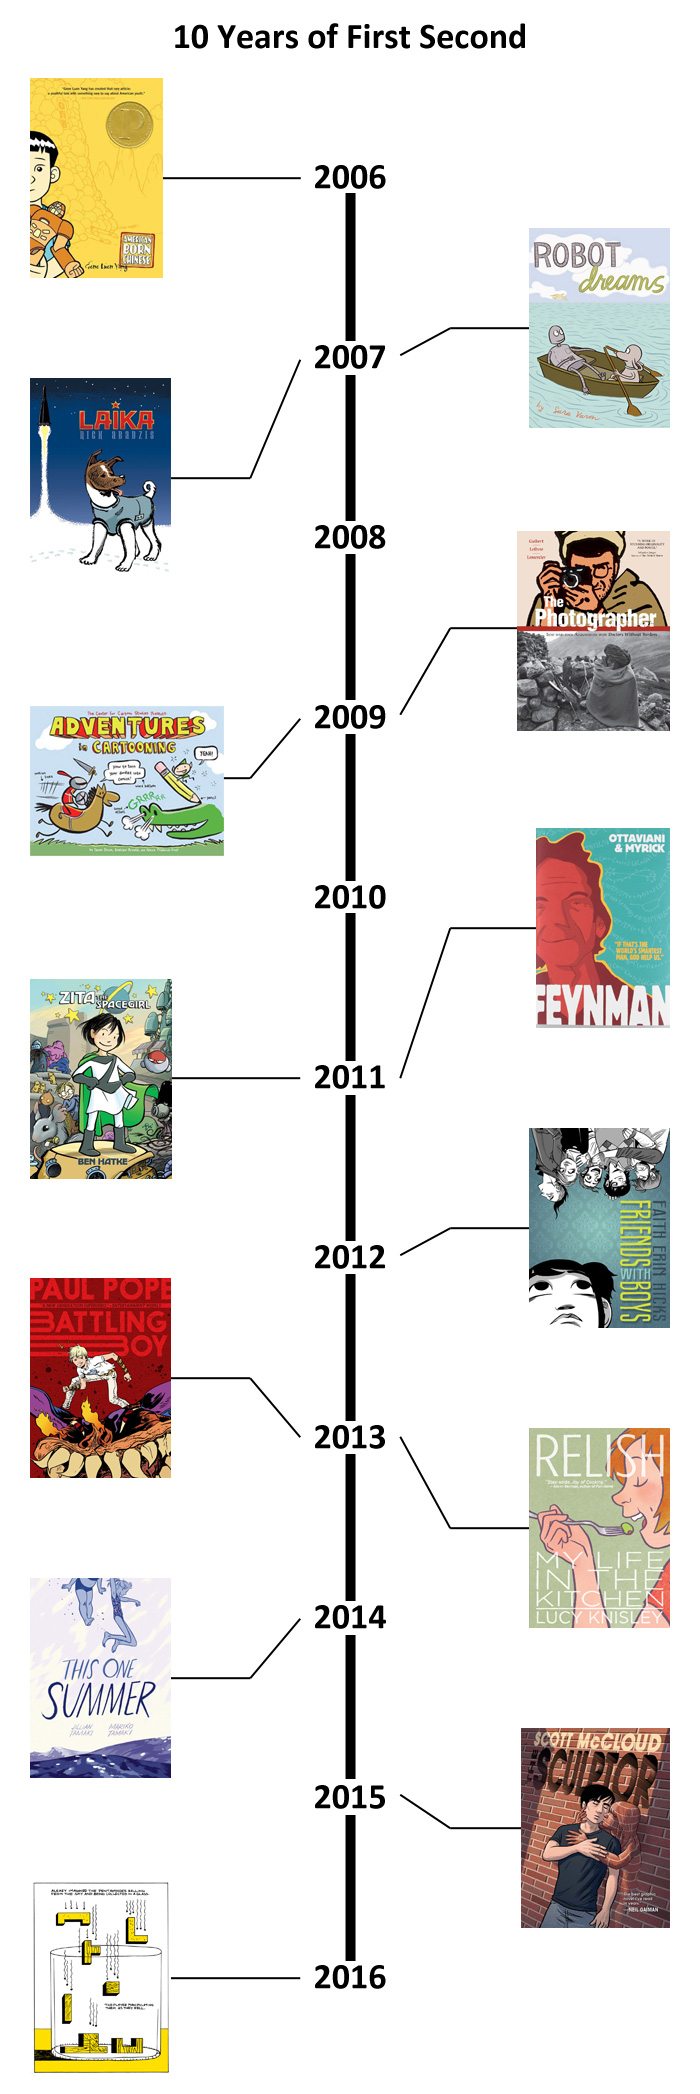 American Born Chinese by Gene Luen Yang (2006) Robot Dreams by Sara Varon (2007) Laika by Nick Abadzis (2007) The Photographer by Emmanuel Guibert, Didier Lefèvre, and Frederic Lemercier (2009) Adventures in Cartooning by Alexis Frederick-Frost and Andrew Arnold (2009) Feynman by Jim Ottaviani and Leland Myrick (2011) Zita the Spacegirl by Ben Hatke (2011) Friends With Boys by Faith Erin Hicks (2012) Battling Boy by Paul Pope (2013) Relish by Lucy Knisley (2013) This One Summer by Mariko Tamaki and Jillian Tamaki (2014) The Sculptor by Scott McCloud (2015) Tetris by Box Brown (coming in 2016!)